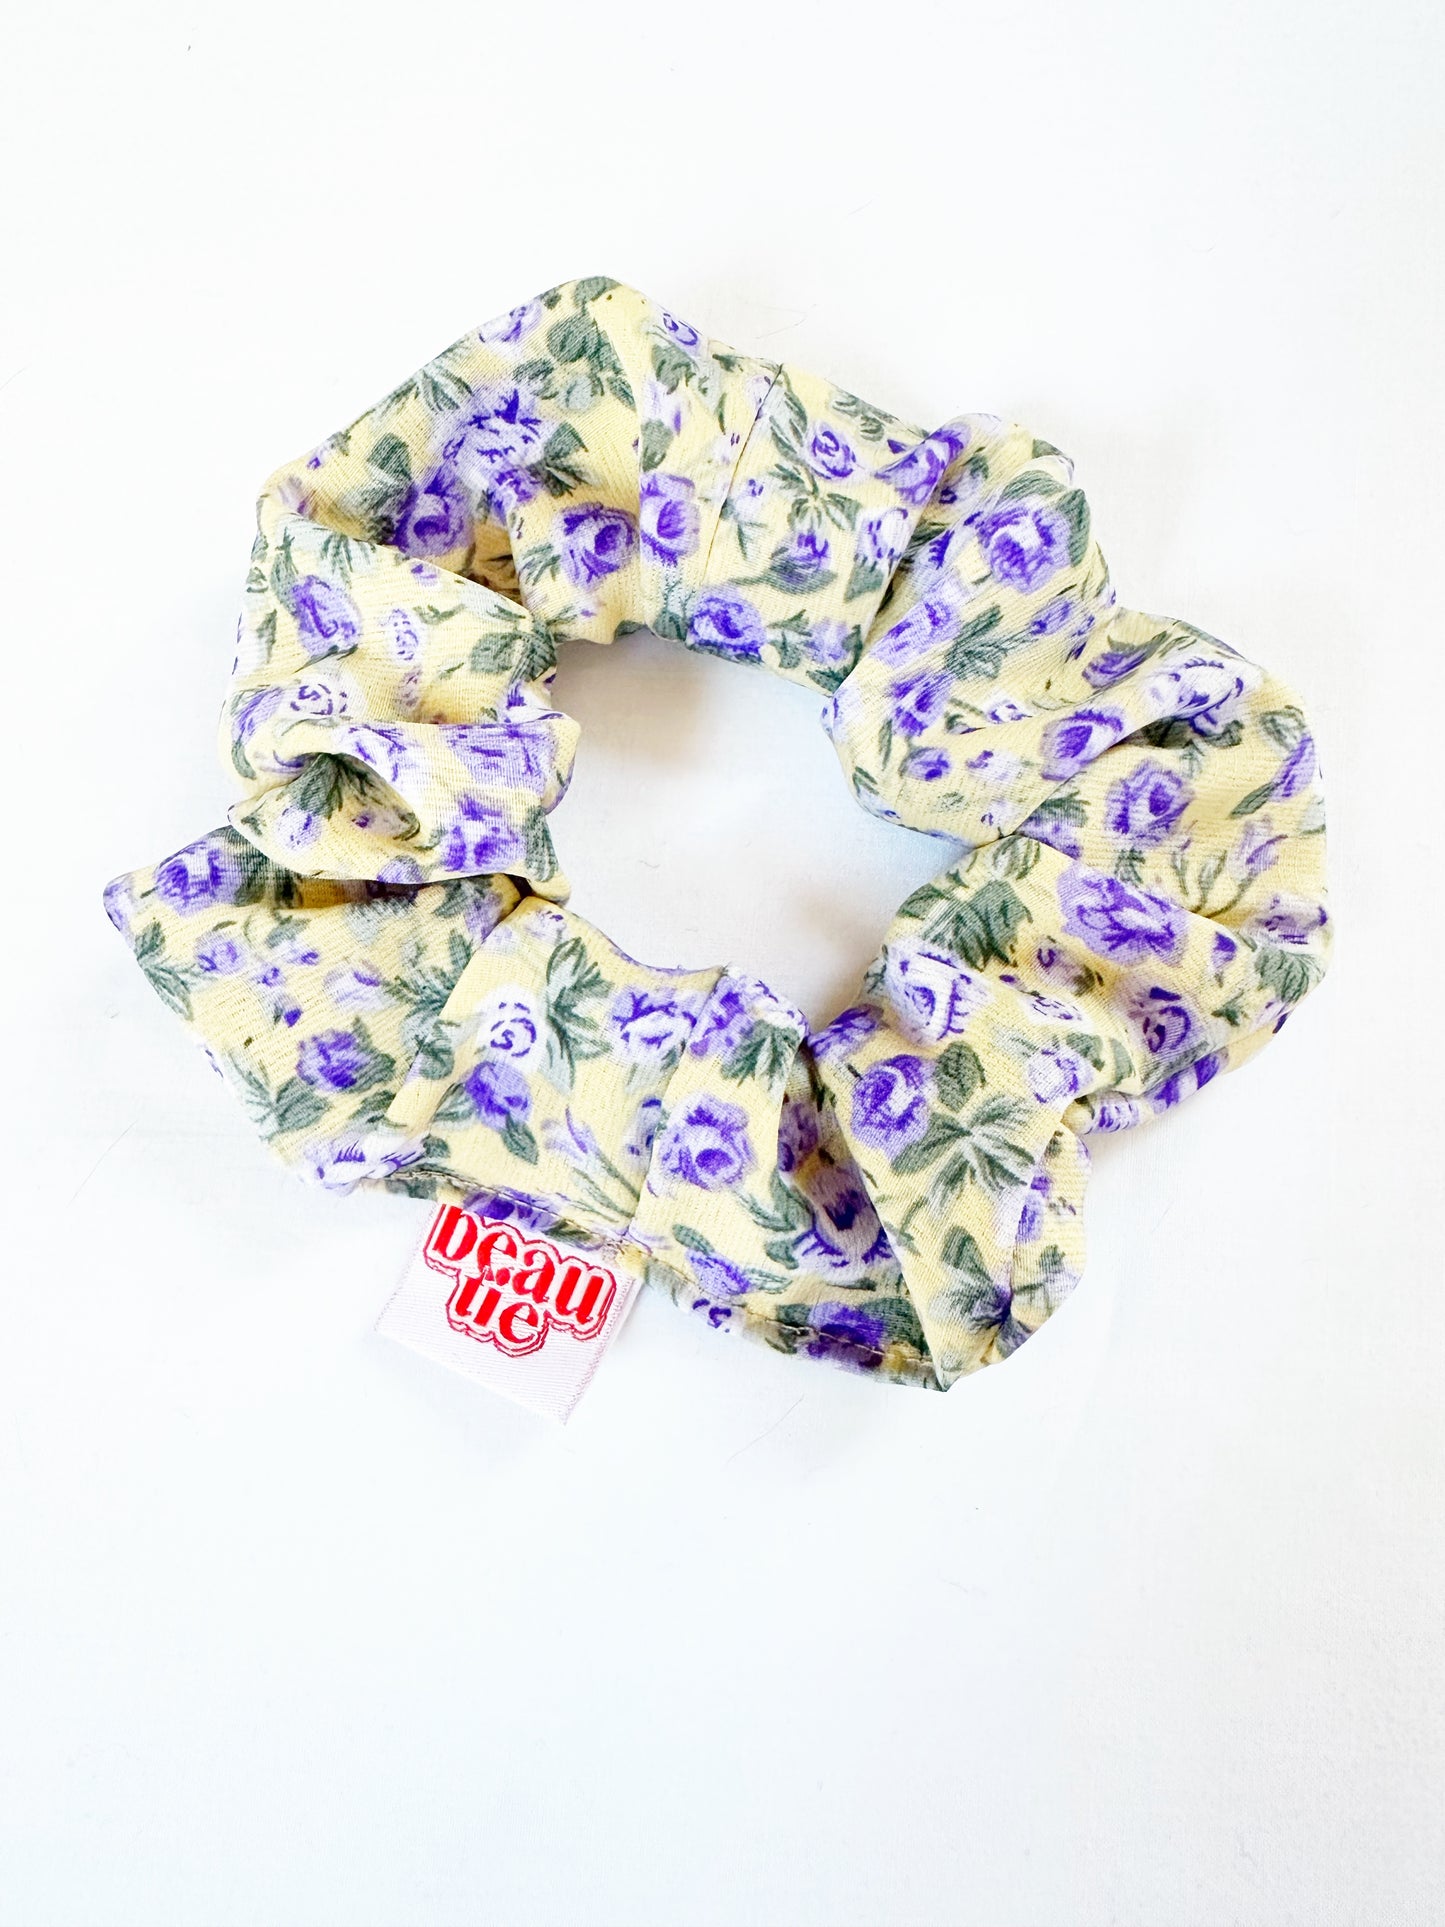 OG scrunchie in lilac and yellow rose print